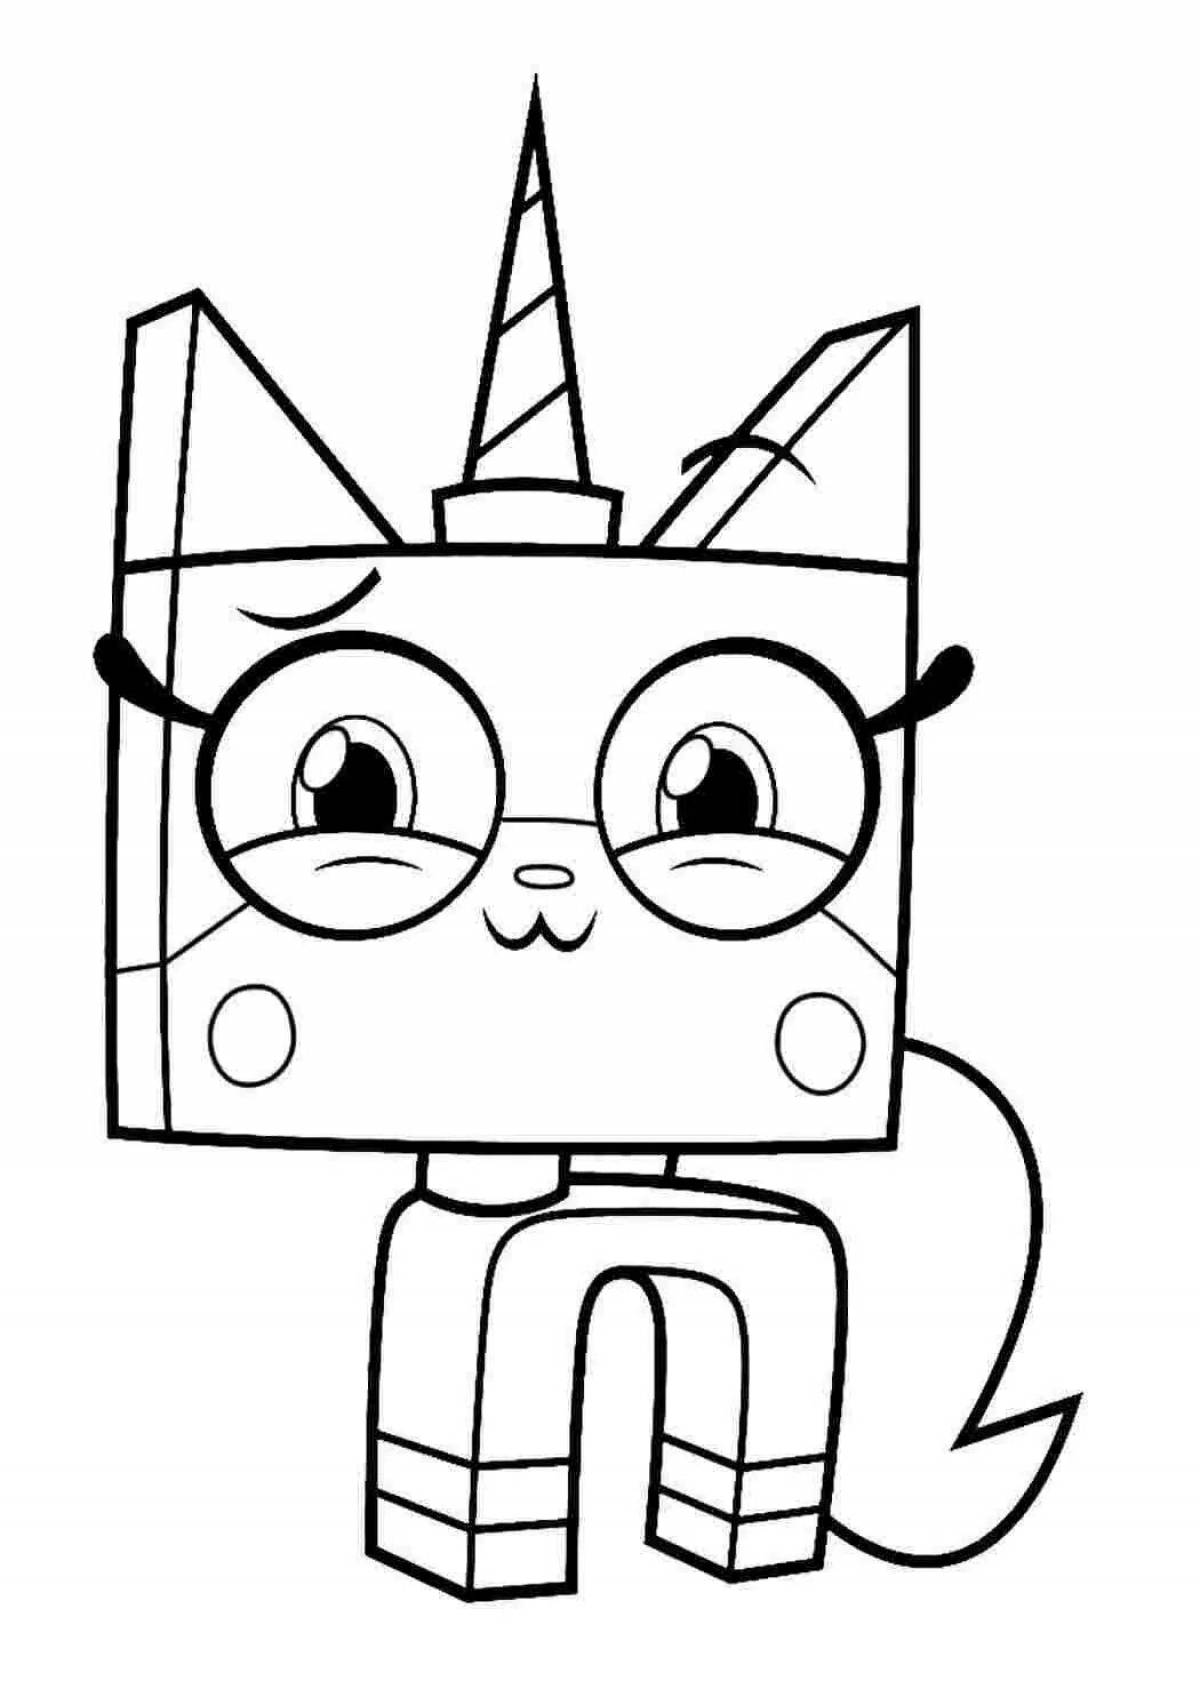 Colorful lego unikitty coloring page